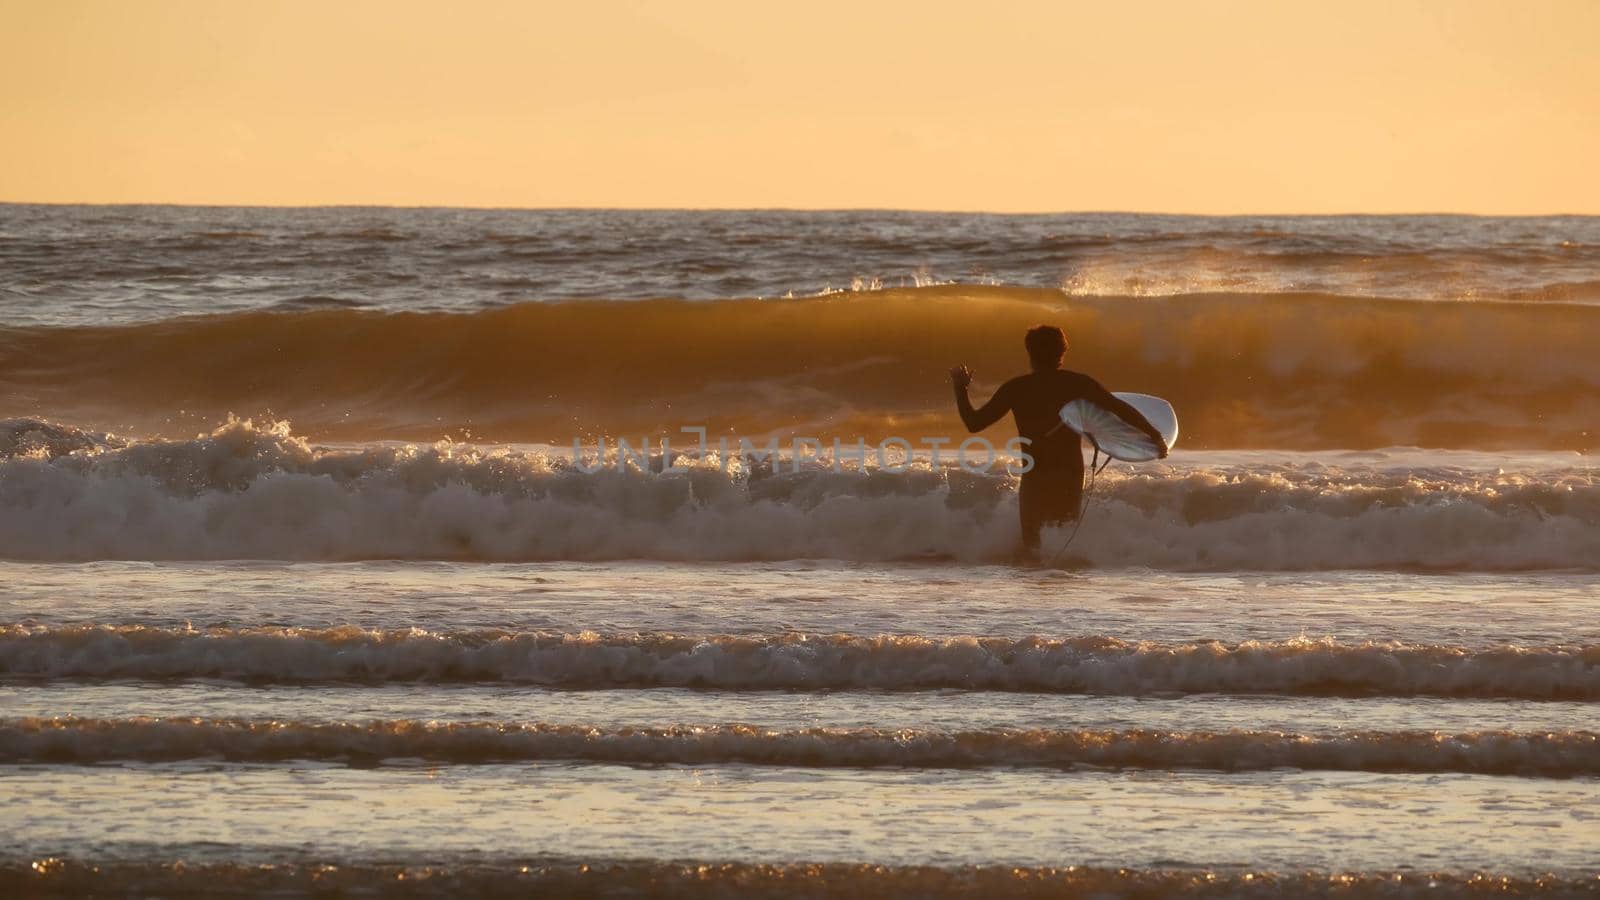 Oceanside, California USA - 27 Dec 2019: Surfer silhouette, pacific ocean beach in evening, water waves and sunset. Tropical coastline, waterfront vacation resort. People enjoy surfing as sport hobby.